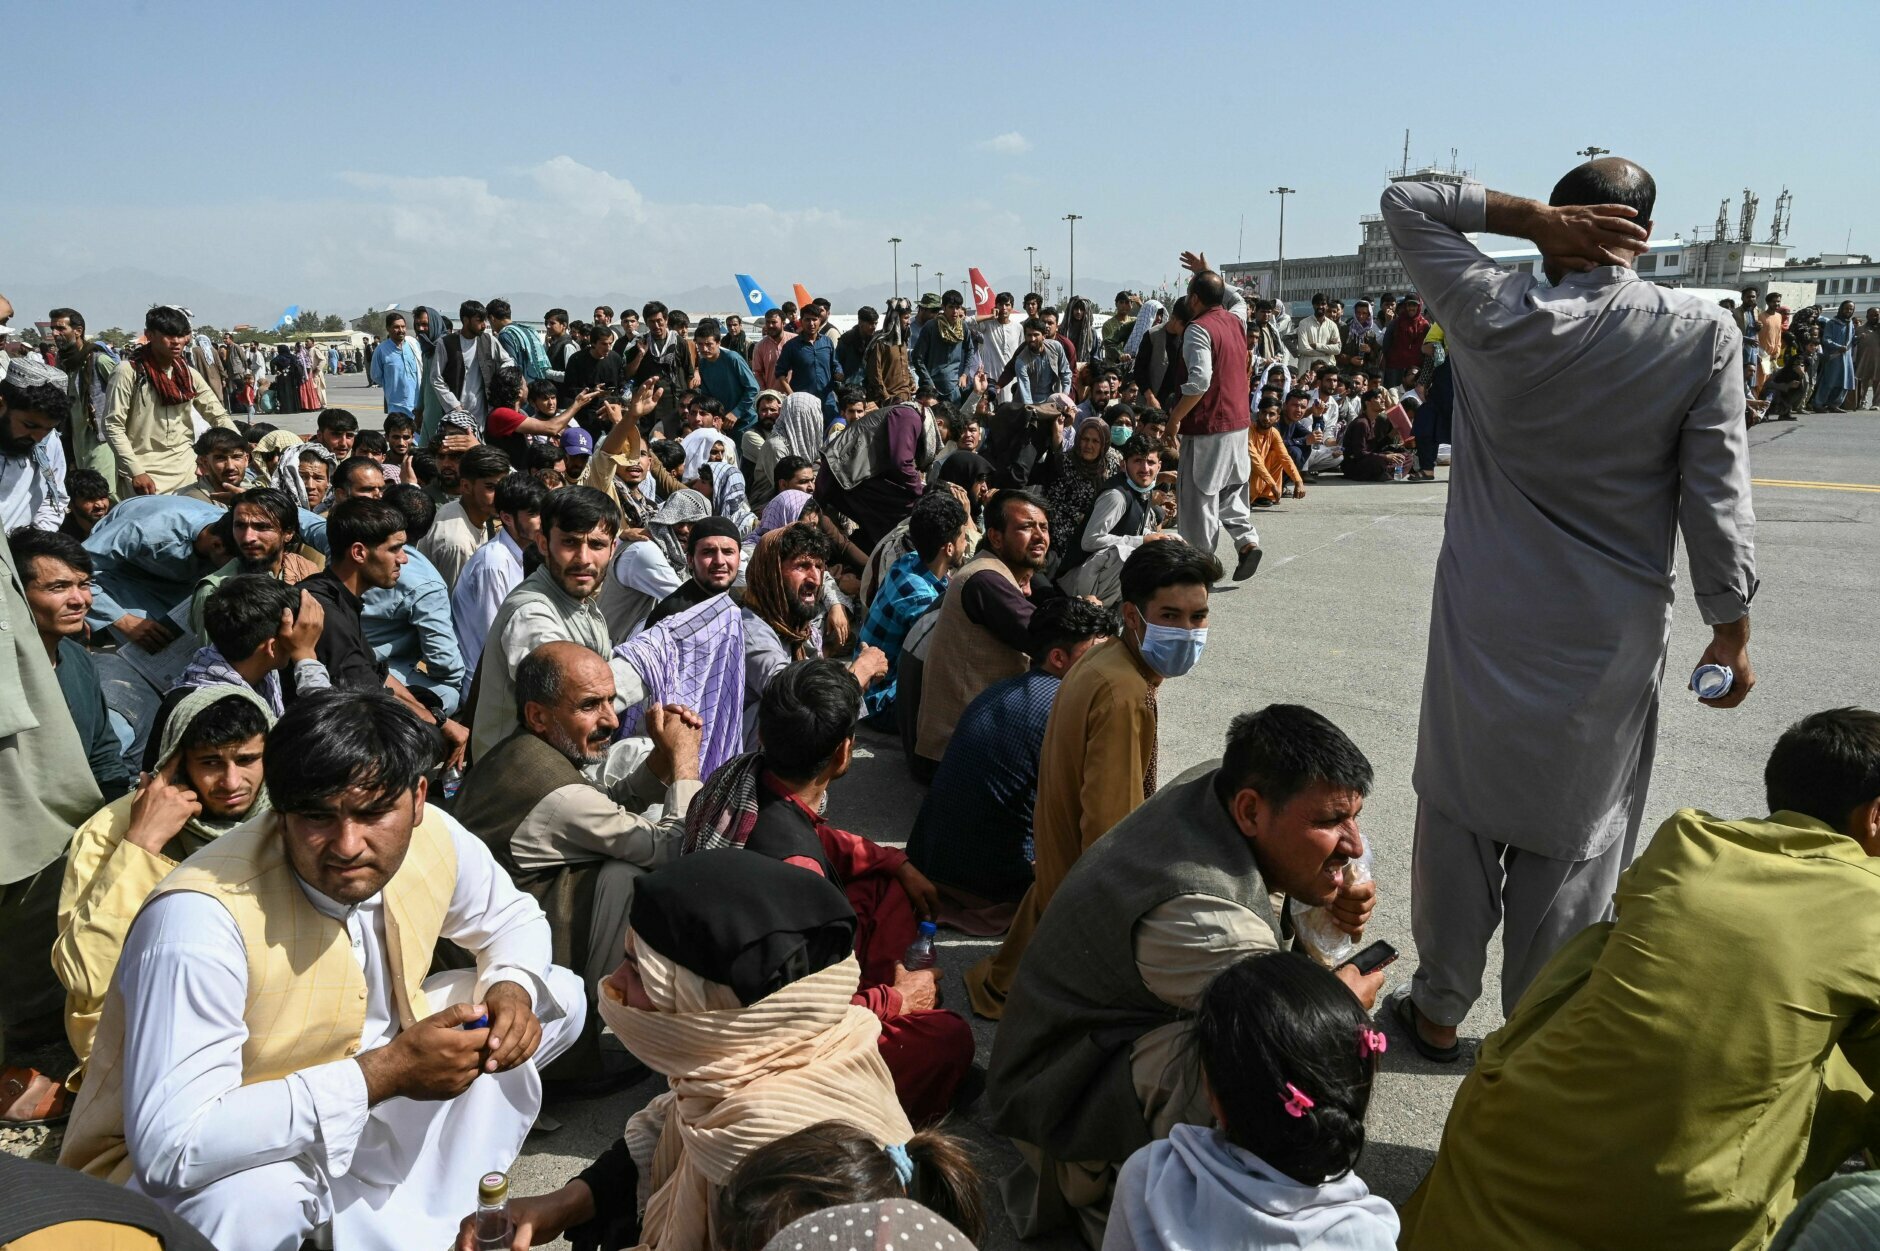 TOPSHOT - Afghan passengers sit as they wait to leave the Kabul airport in Kabul on August 16, 2021, after a stunningly swift end to Afghanistan's 20-year war, as thousands of people mobbed the city's airport trying to flee the group's feared hardline brand of Islamist rule. (Photo by Wakil Kohsar / AFP) (Photo by WAKIL KOHSAR/AFP via Getty Images)